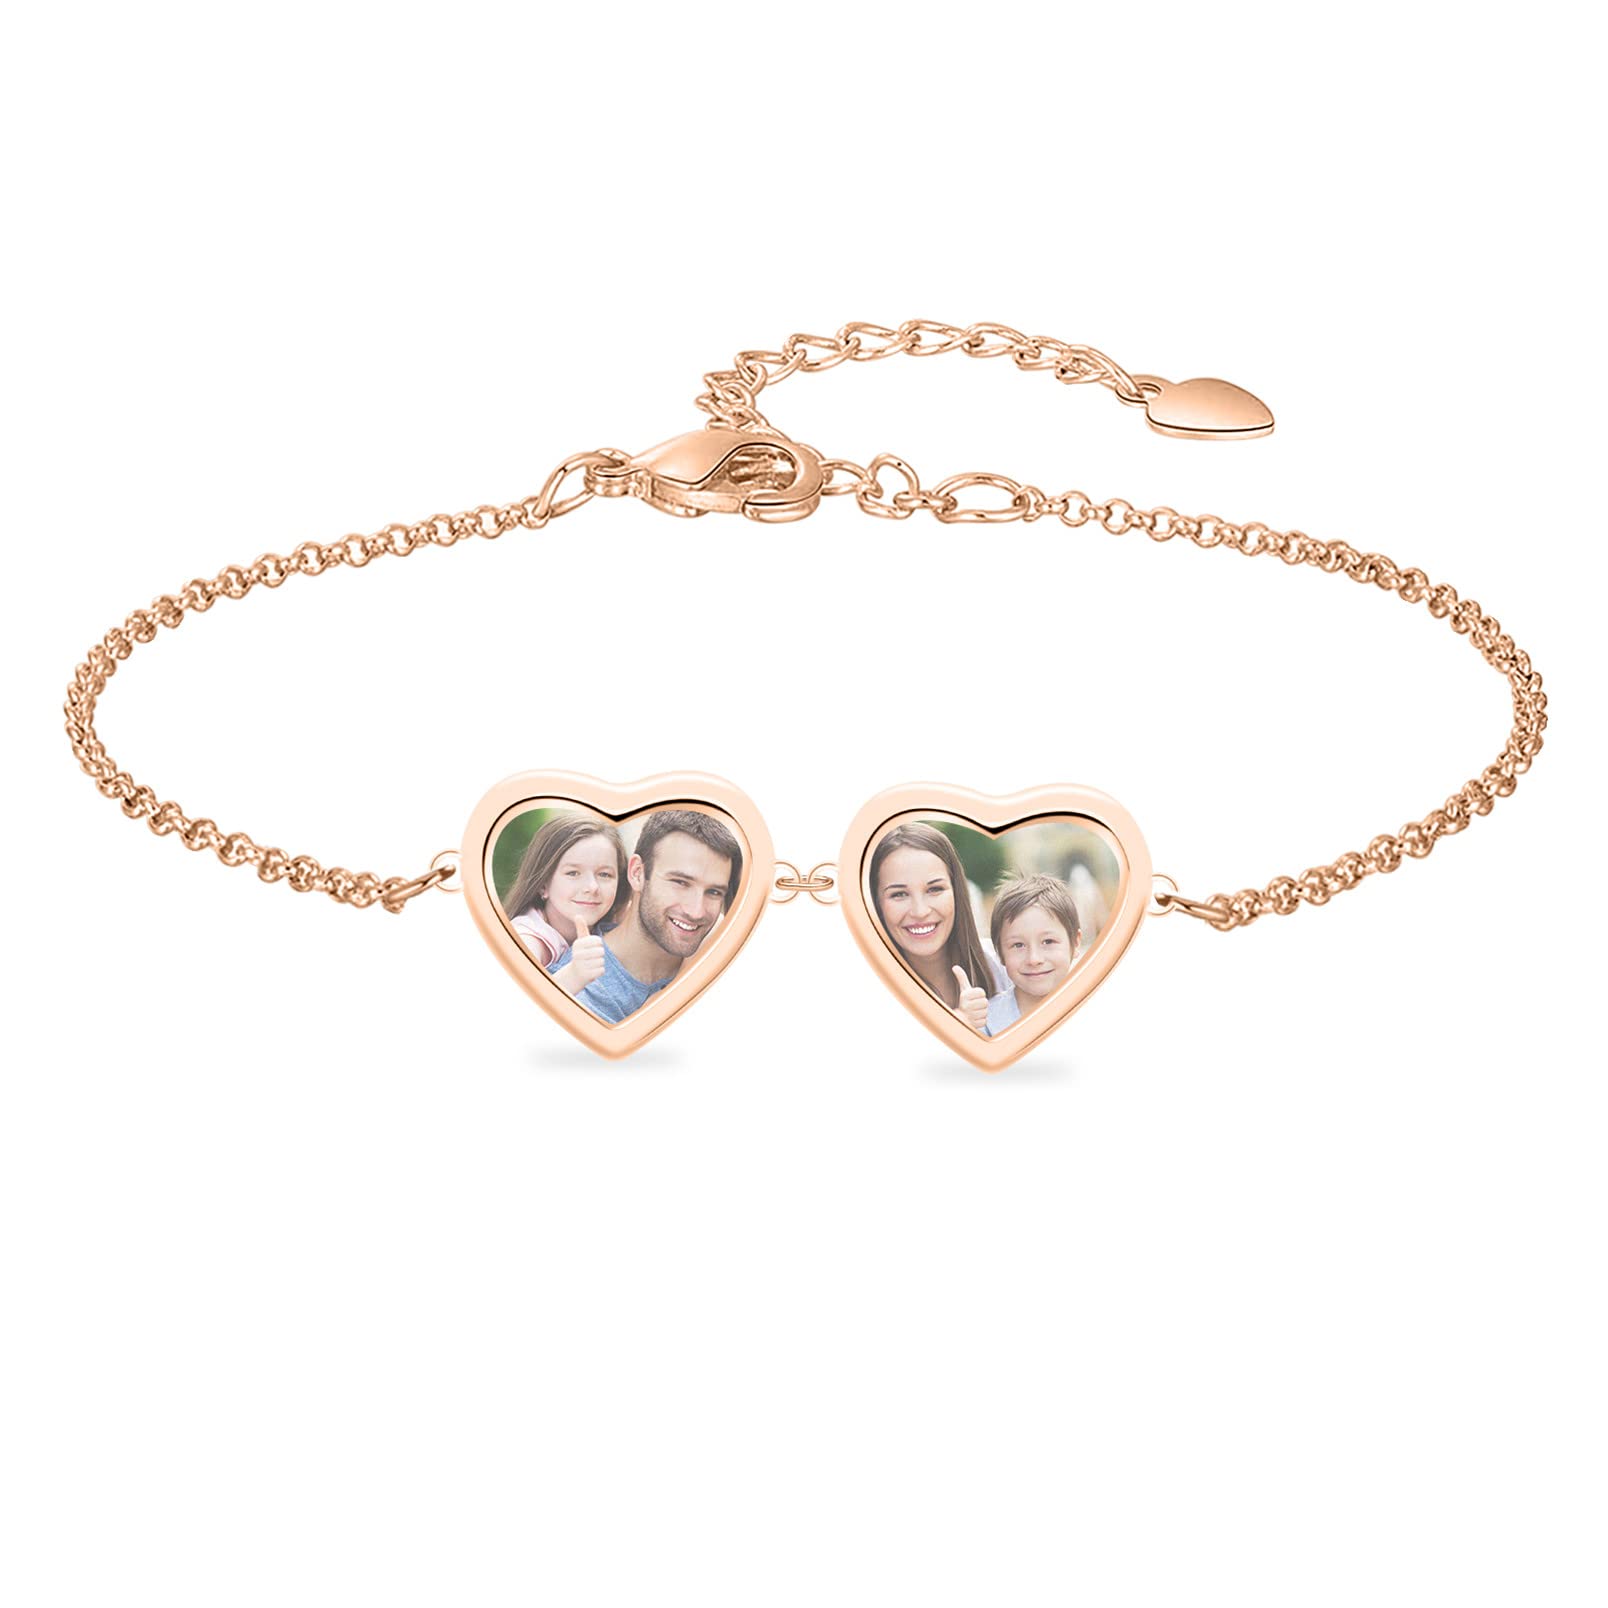 Personalized Bracelet for Women with 2 Photos